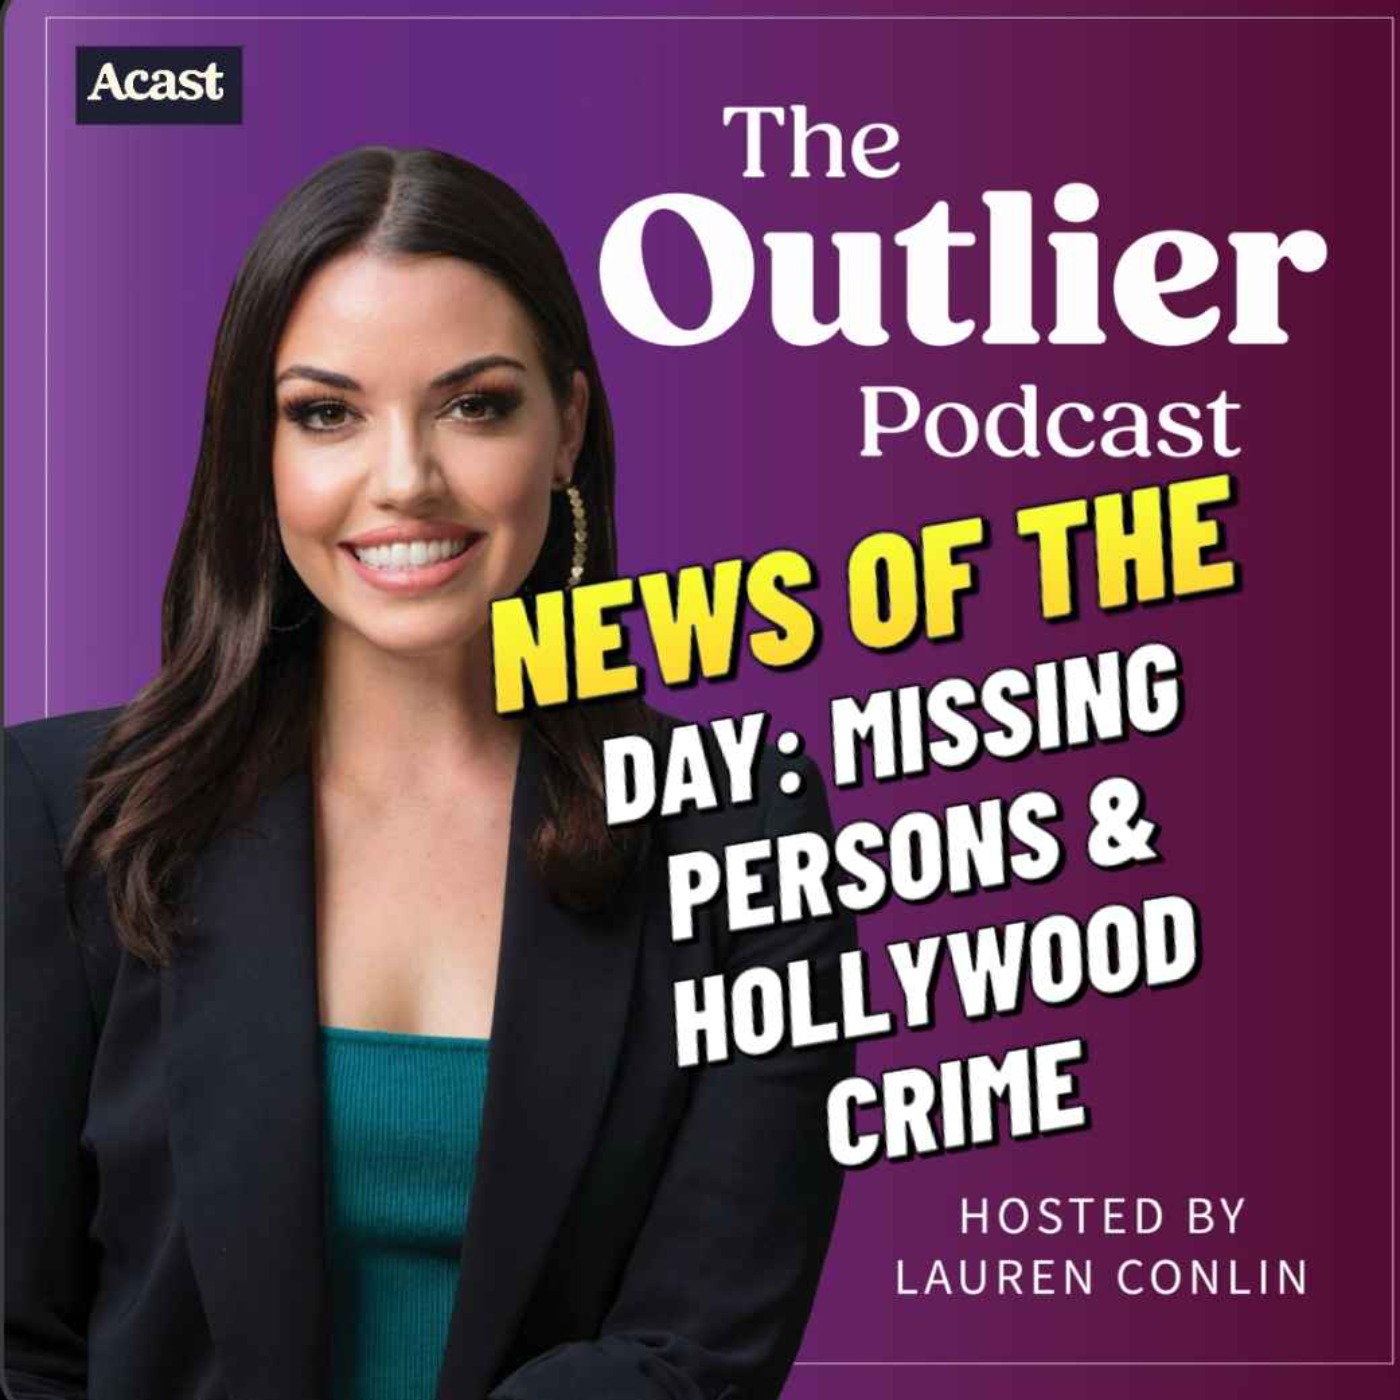 NEWS OF THE DAY: Missing Persons Update & Hollywood Crime